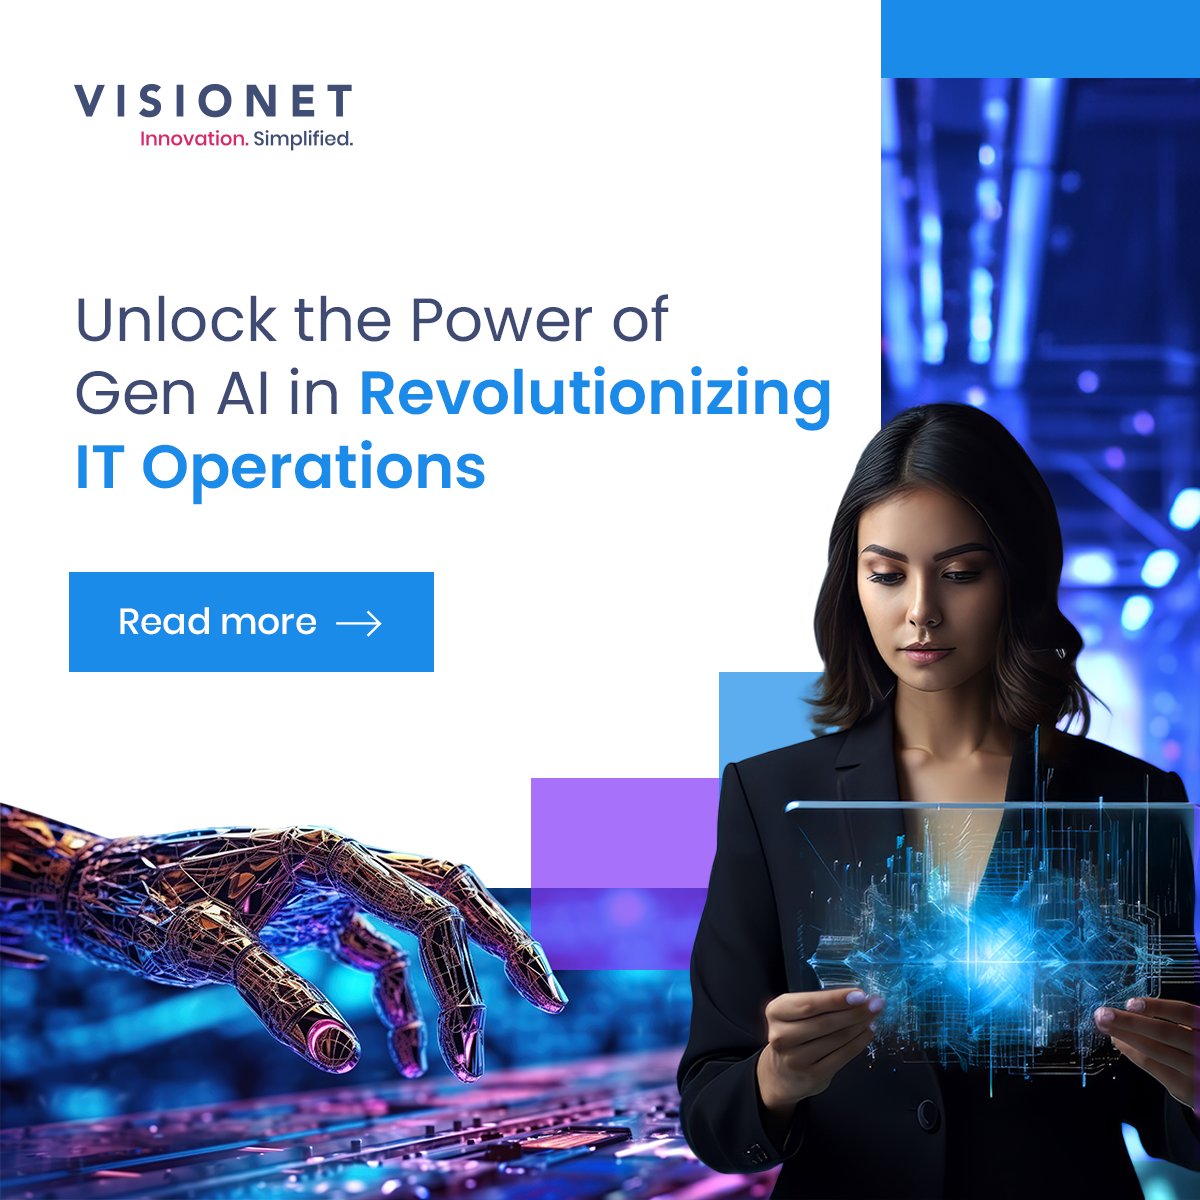 Empowering IT, Gen AI innovates ops. Optimize infrastructure, elevate UX, conquer complexity. Your ultimate game-changing ally awaits.
Read blog to know more: hubs.li/Q02vyM_s0

#GenAI #Innovation #TechnologyManagement #InfrastructureOptimization